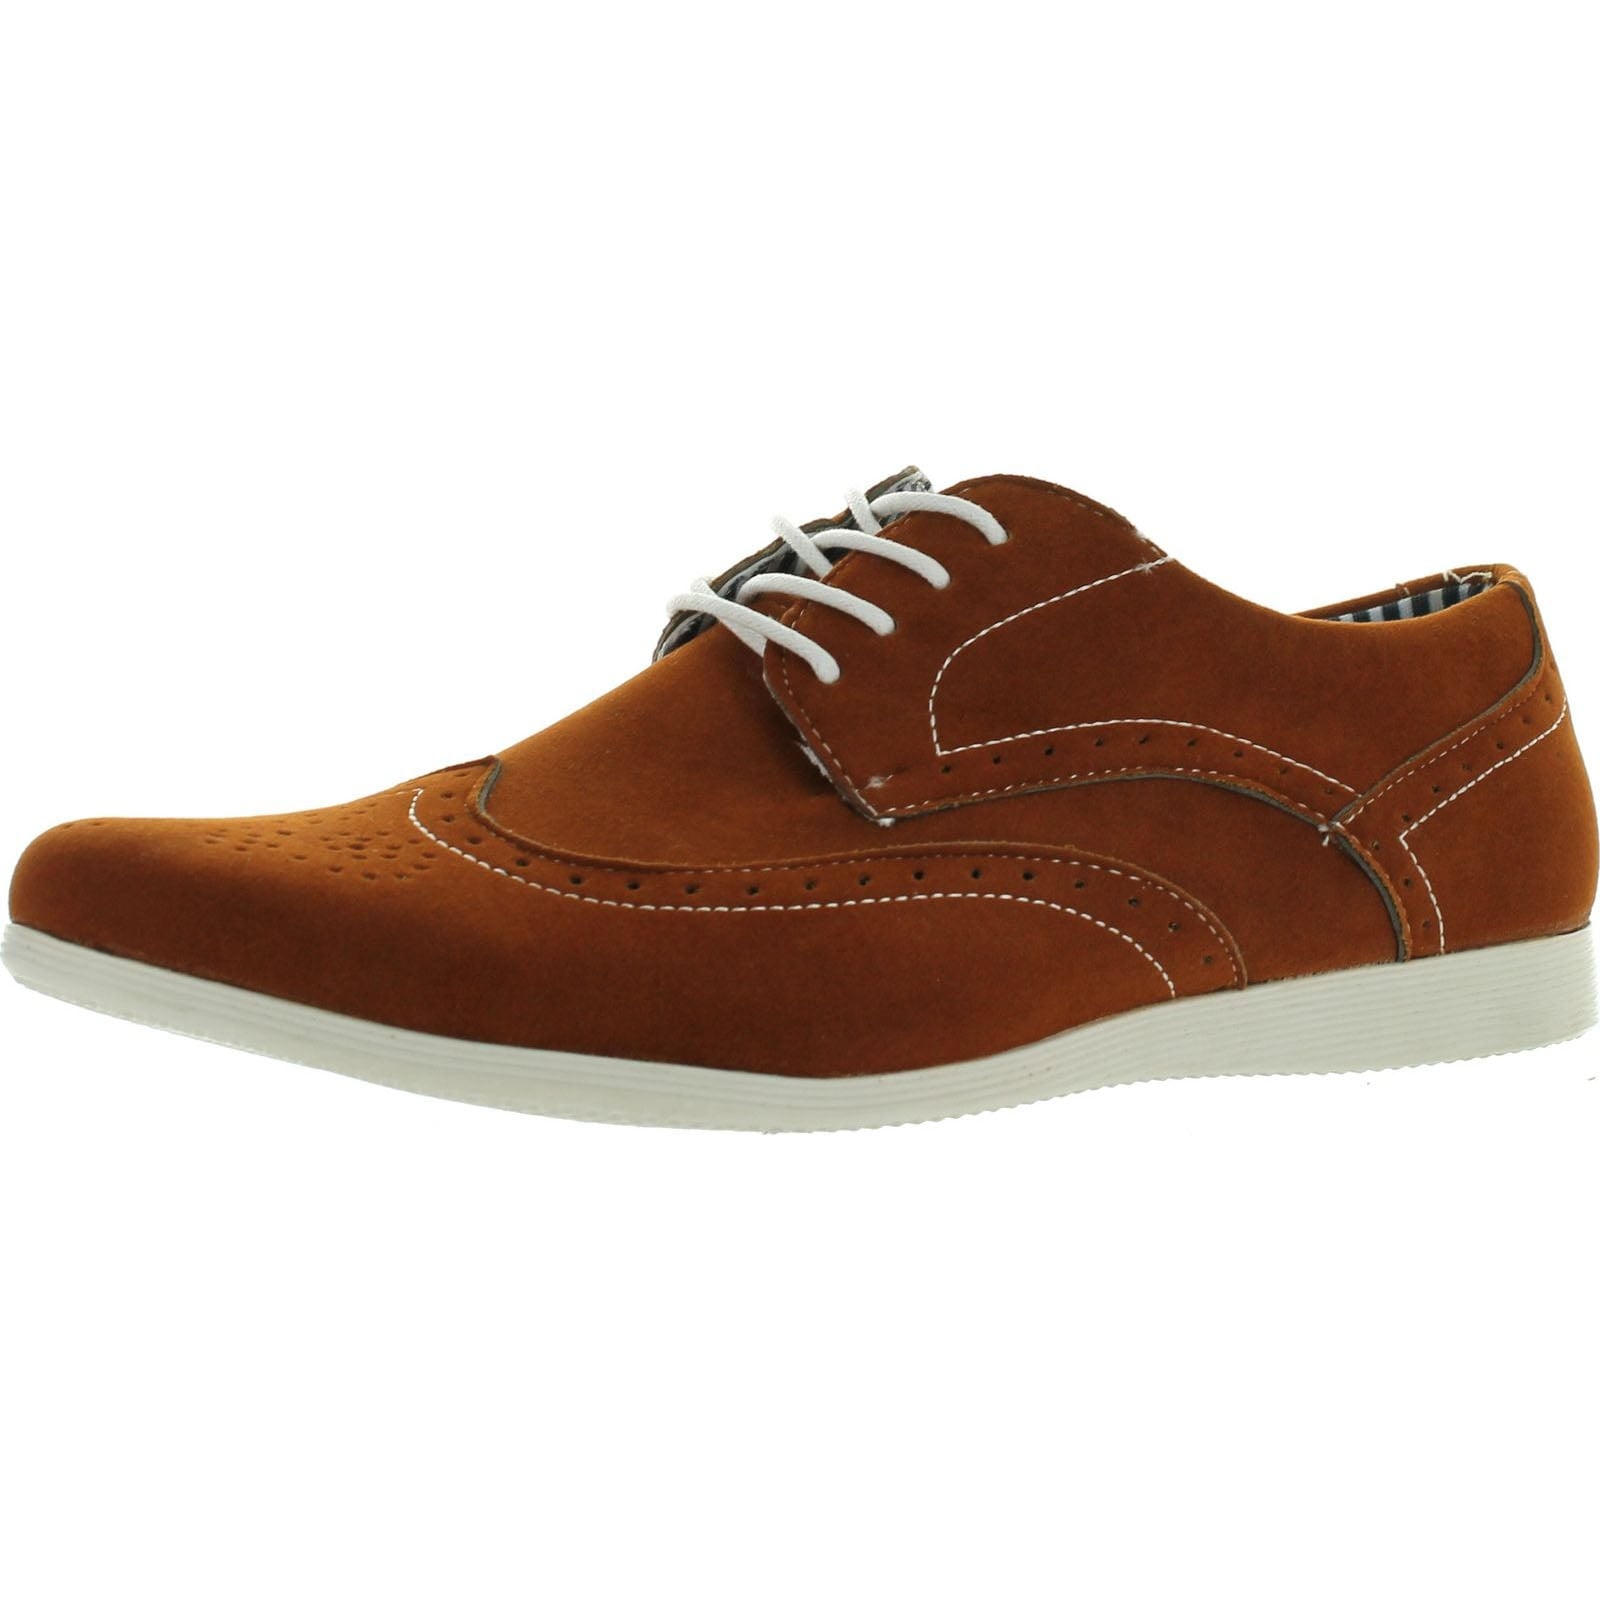 comfortable oxford shoes mens